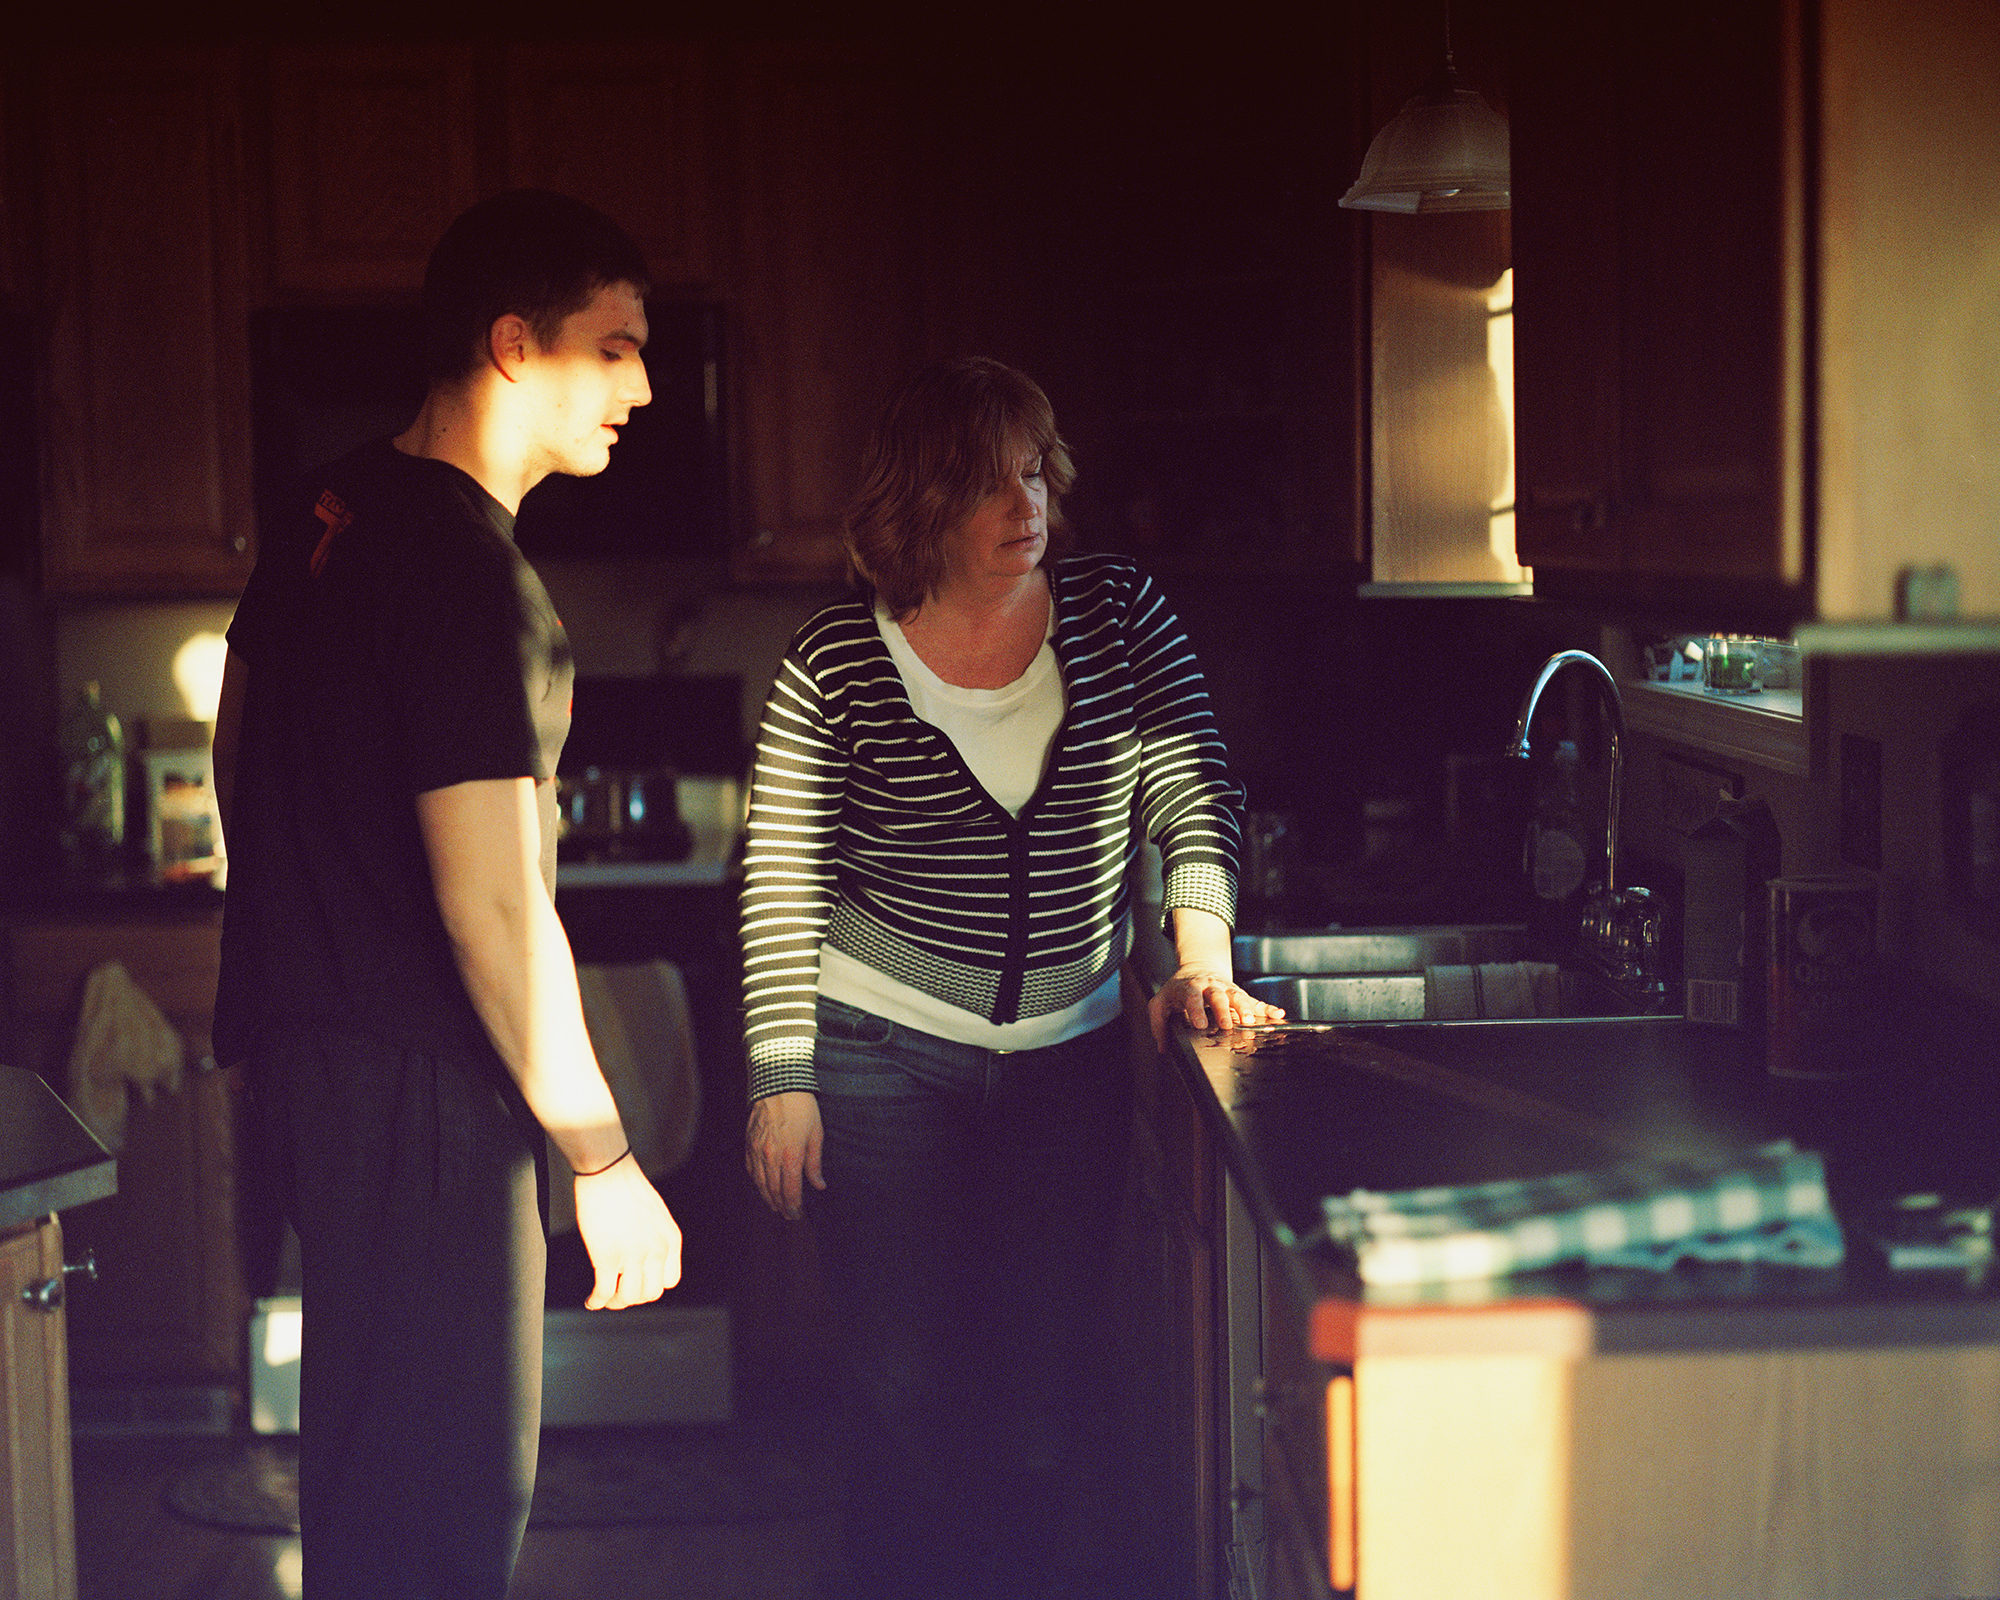 Ben & Mom talking about the dishwasher